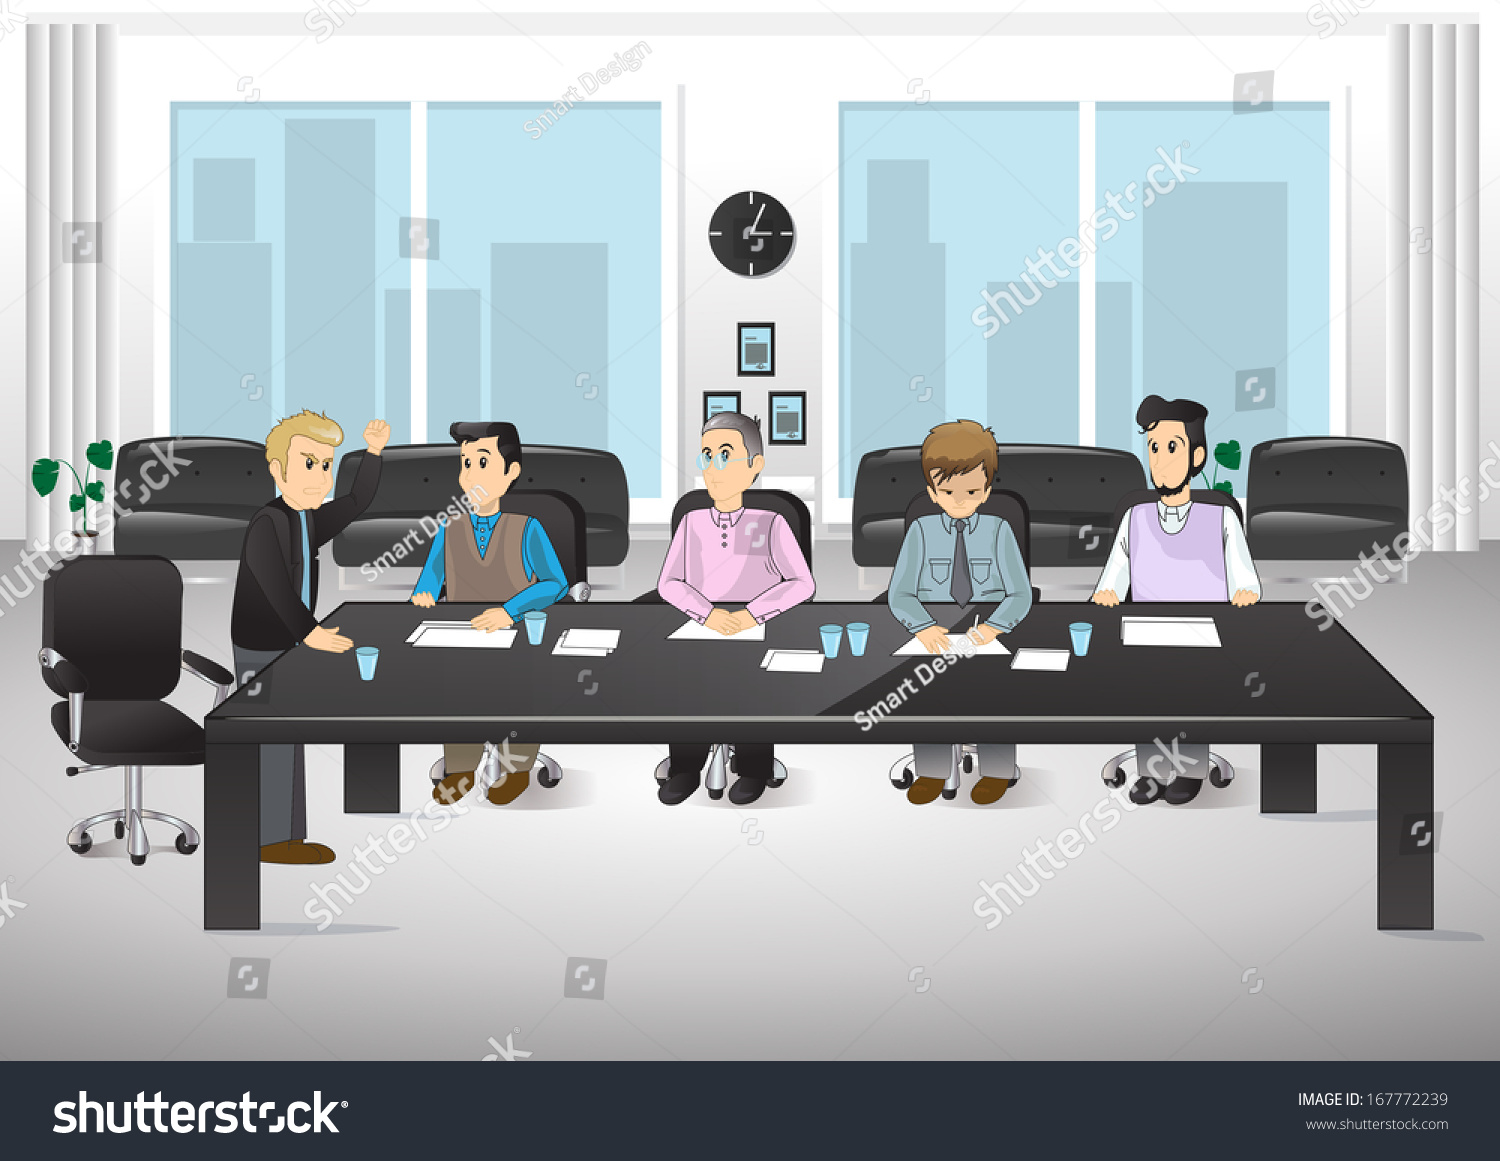 office environment clipart - photo #26